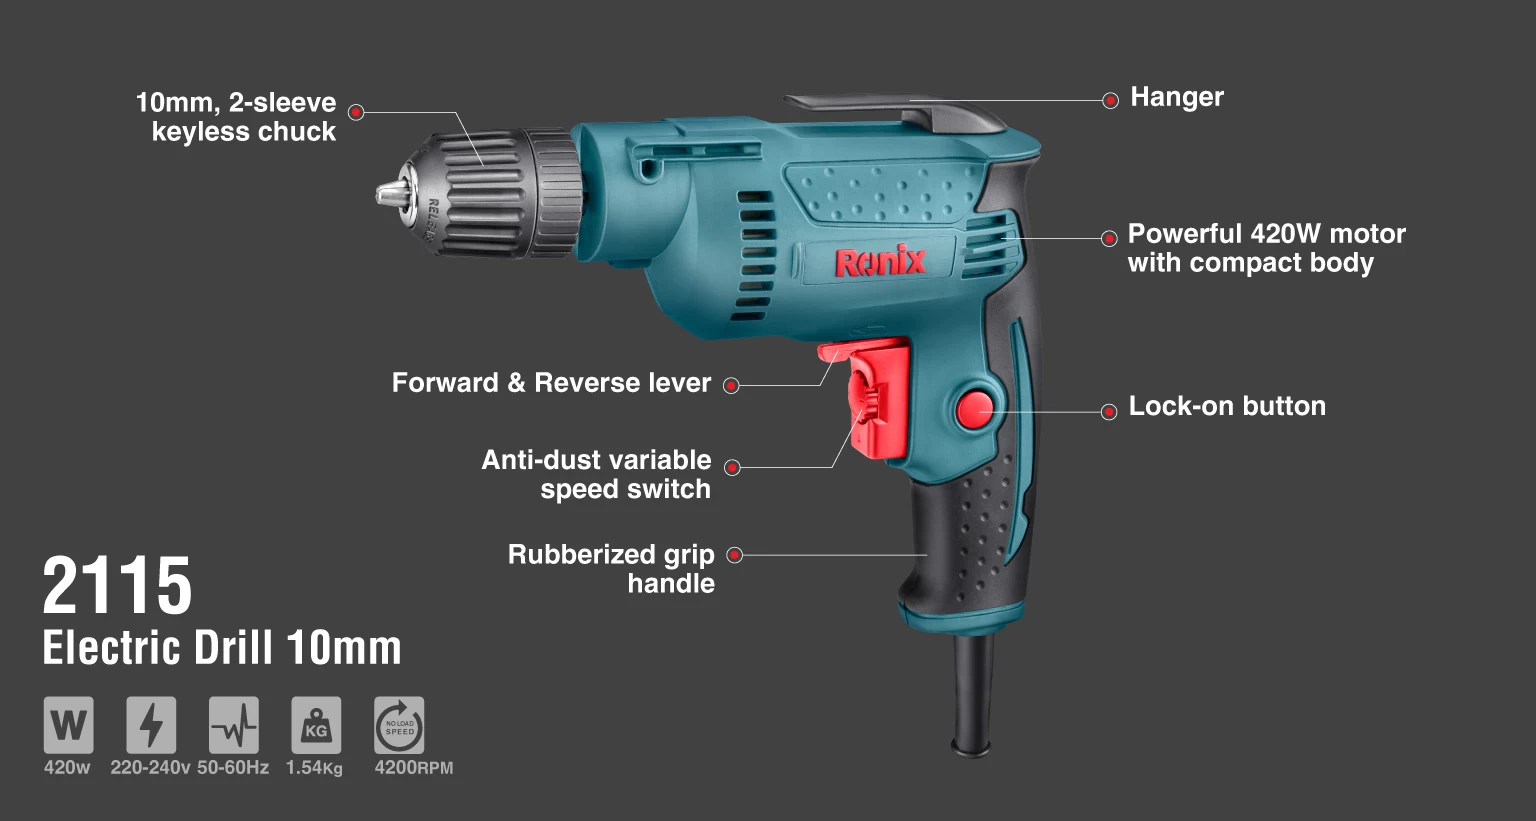 Electric Corded Drill 10mm, 420W, Keyless Chuck_details